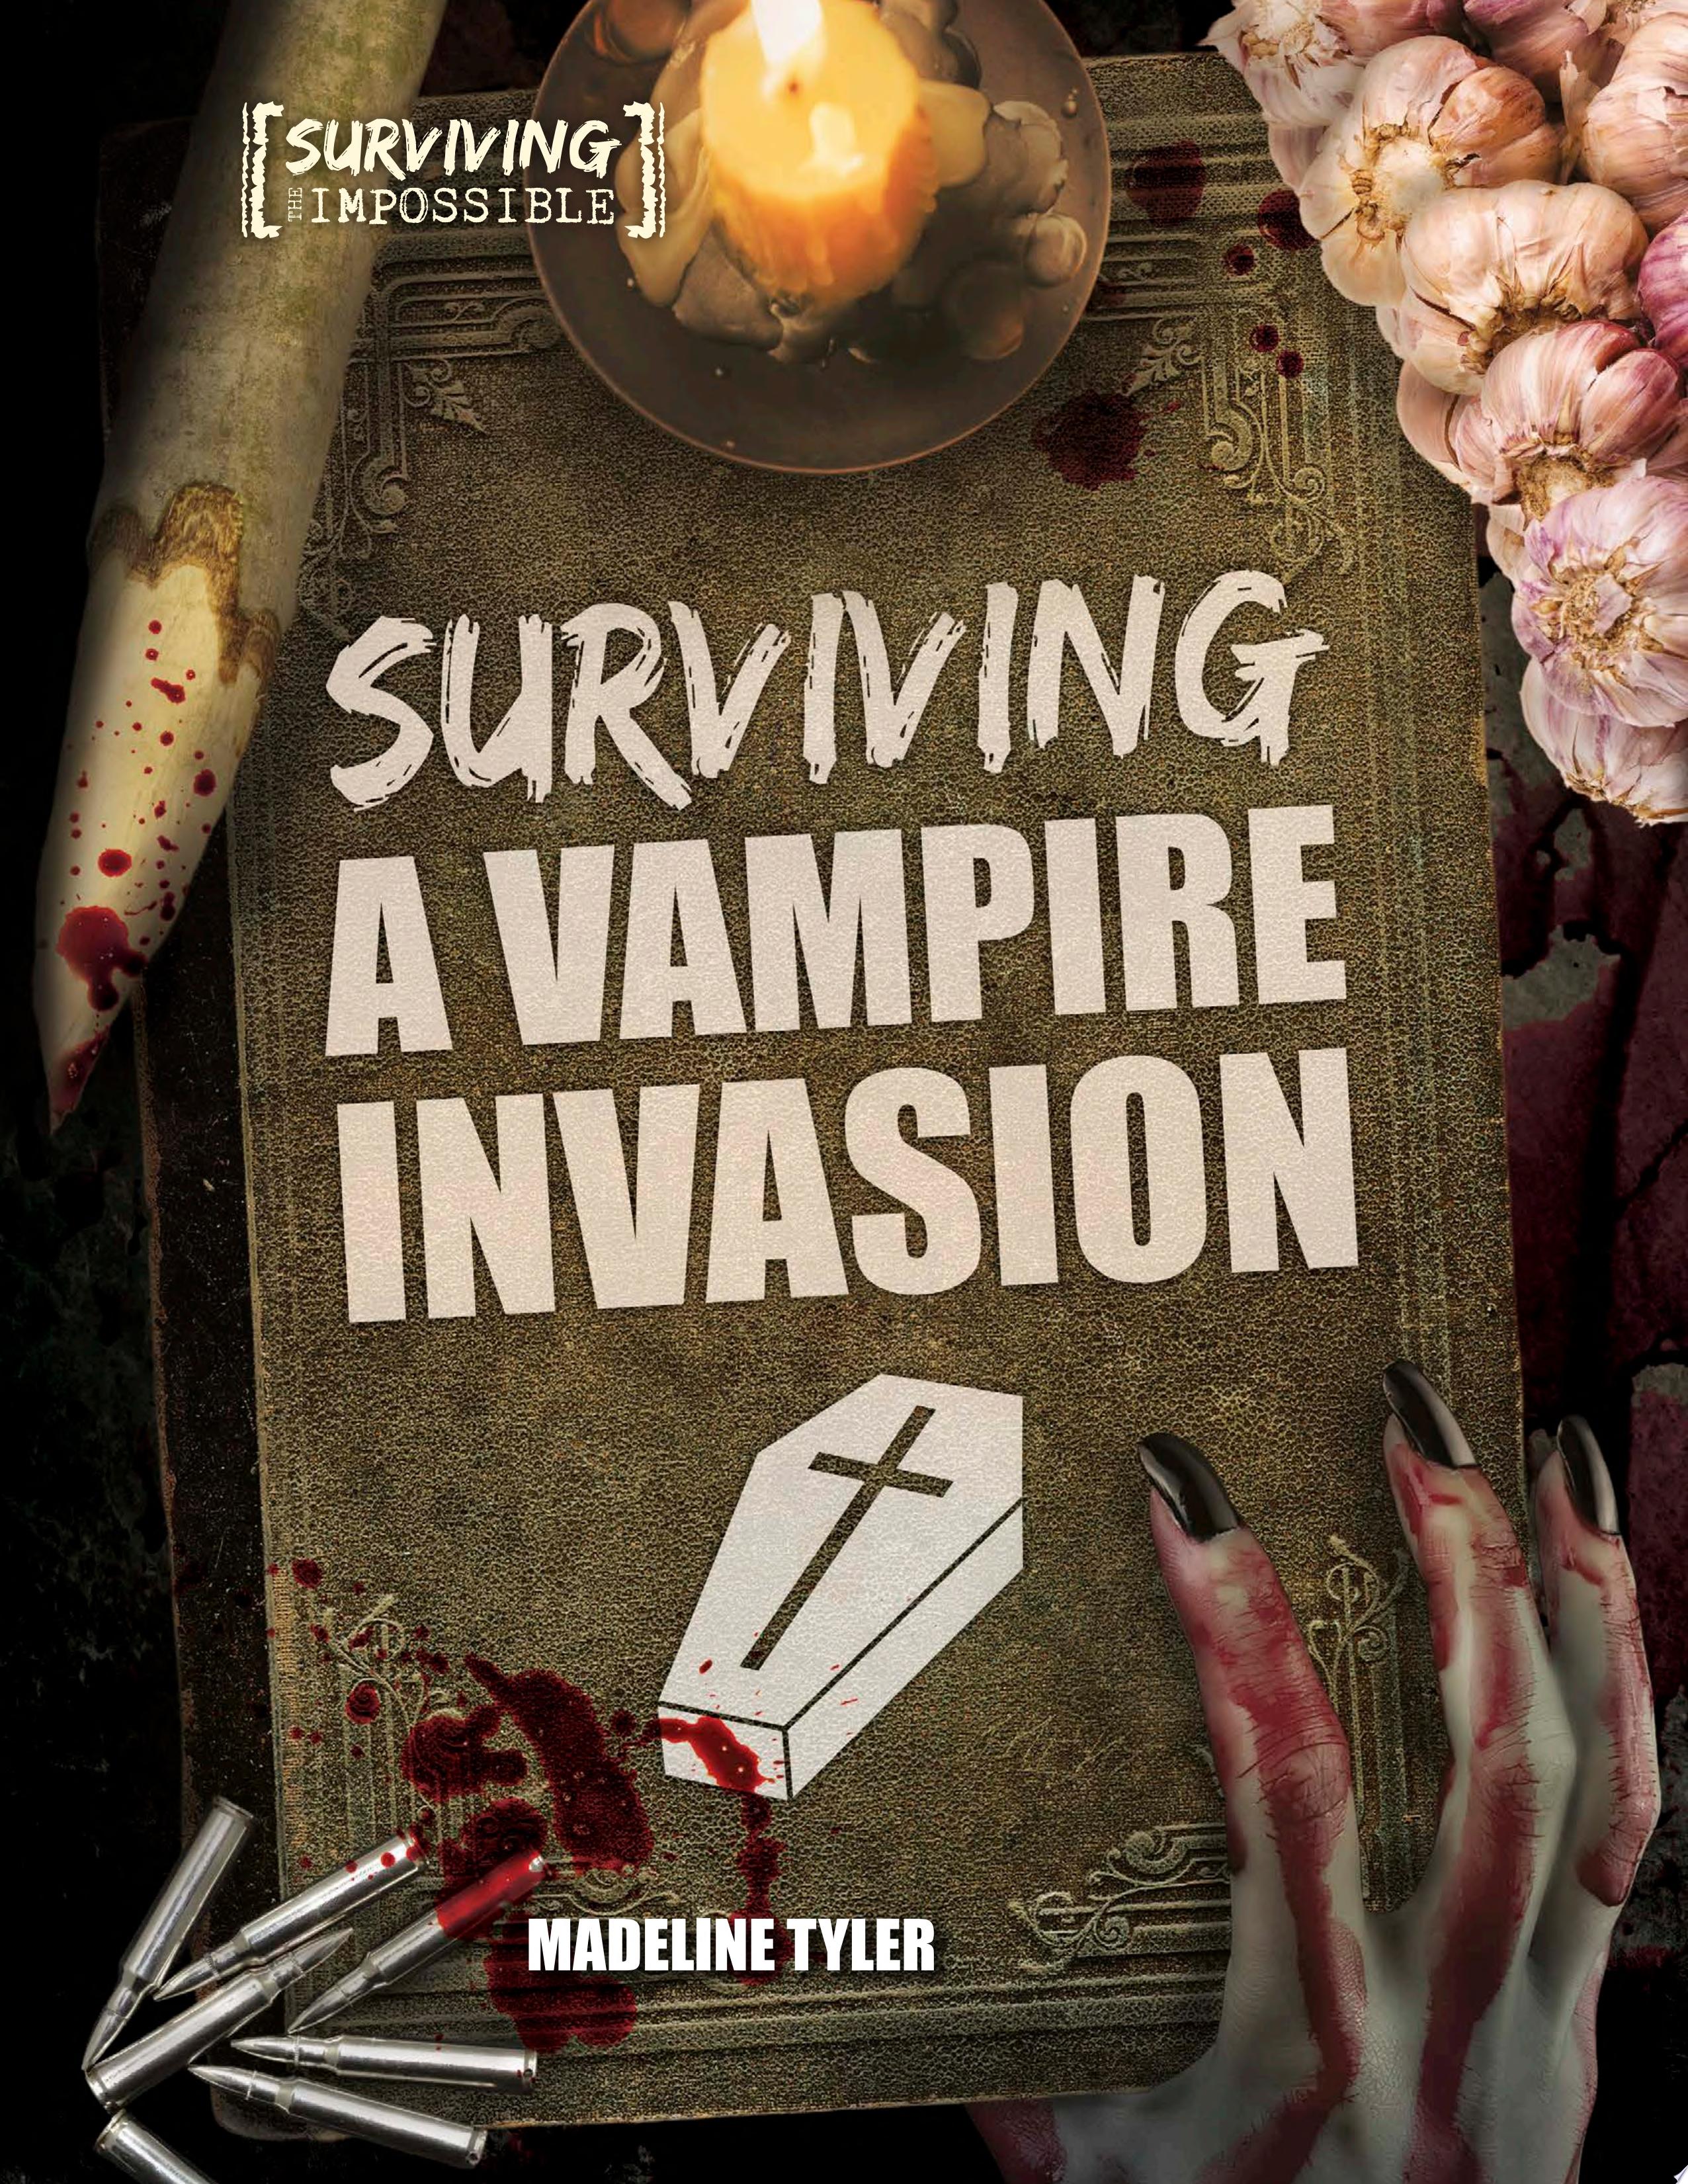 Image for "Surviving a Vampire Invasion"